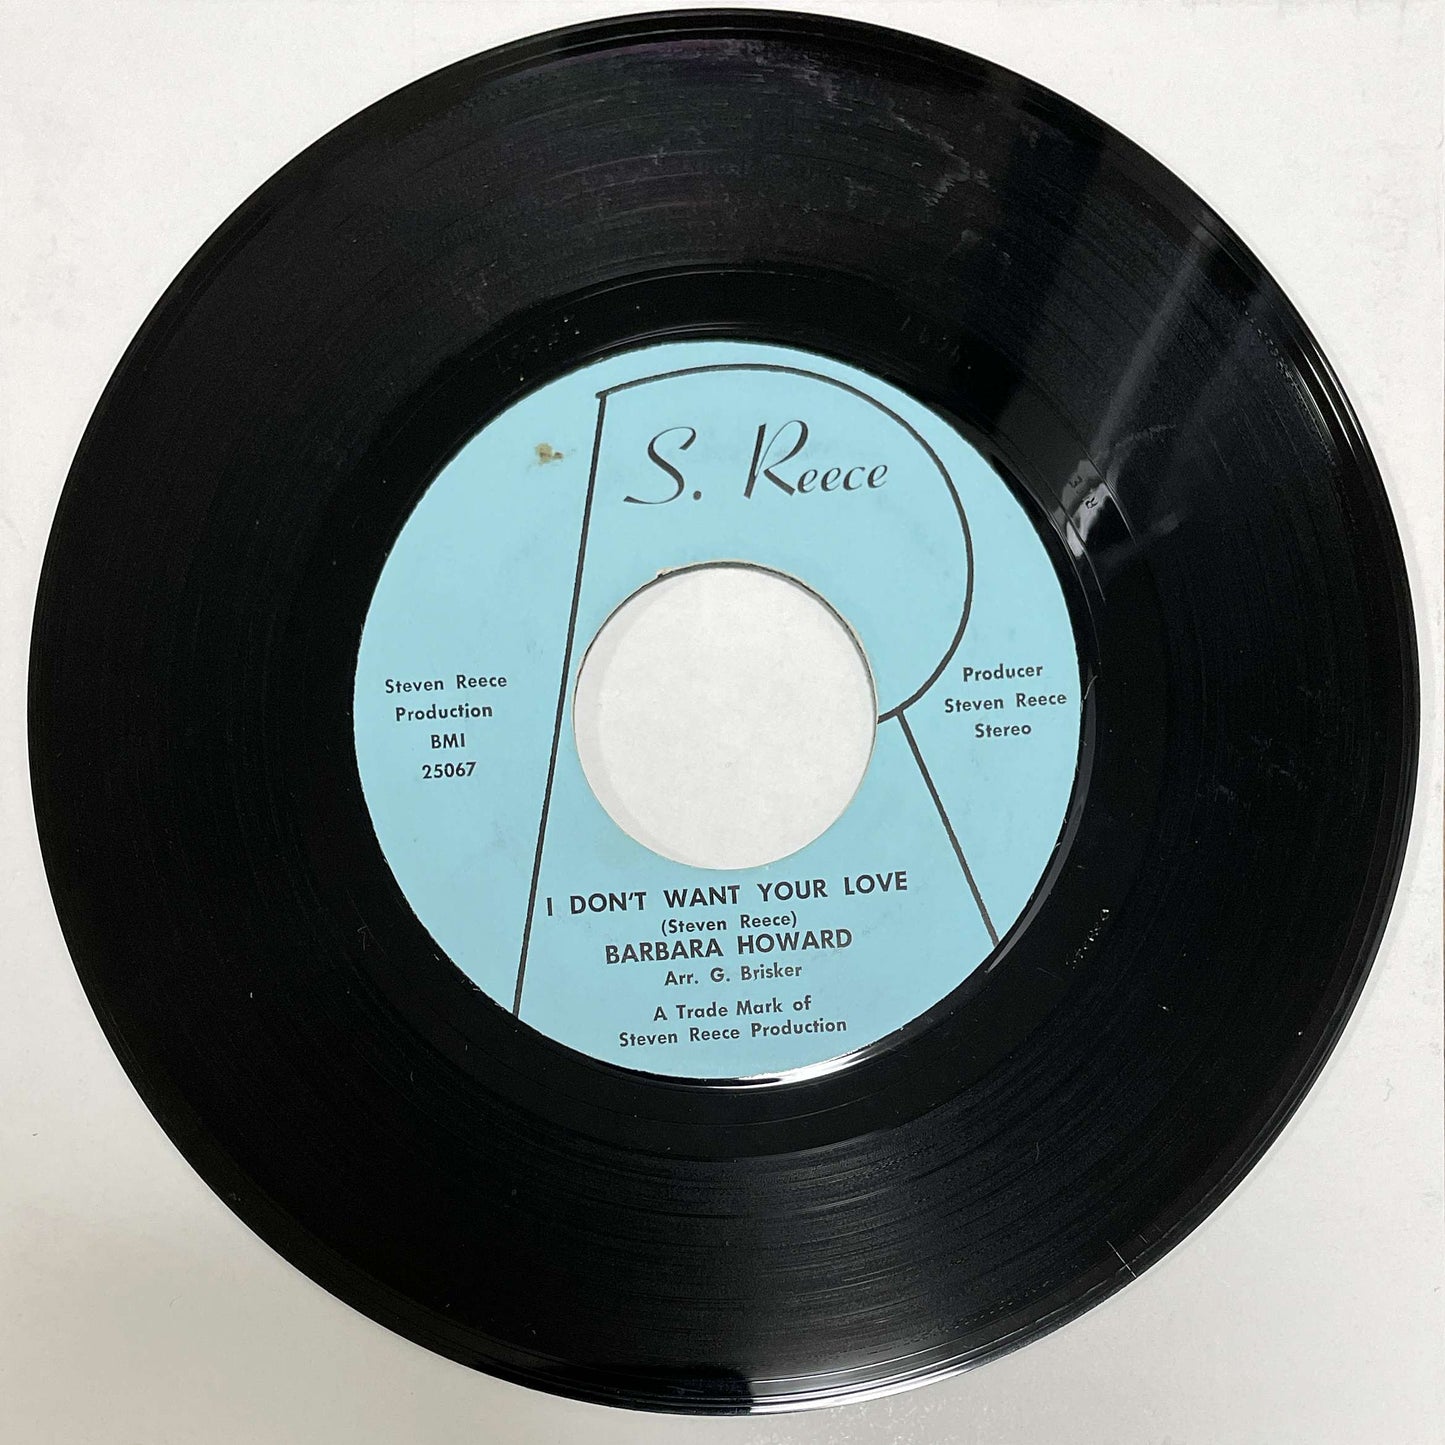 Barbara Howard – I Don't Want Your Love / The Man Above ( S. Reece ) 45